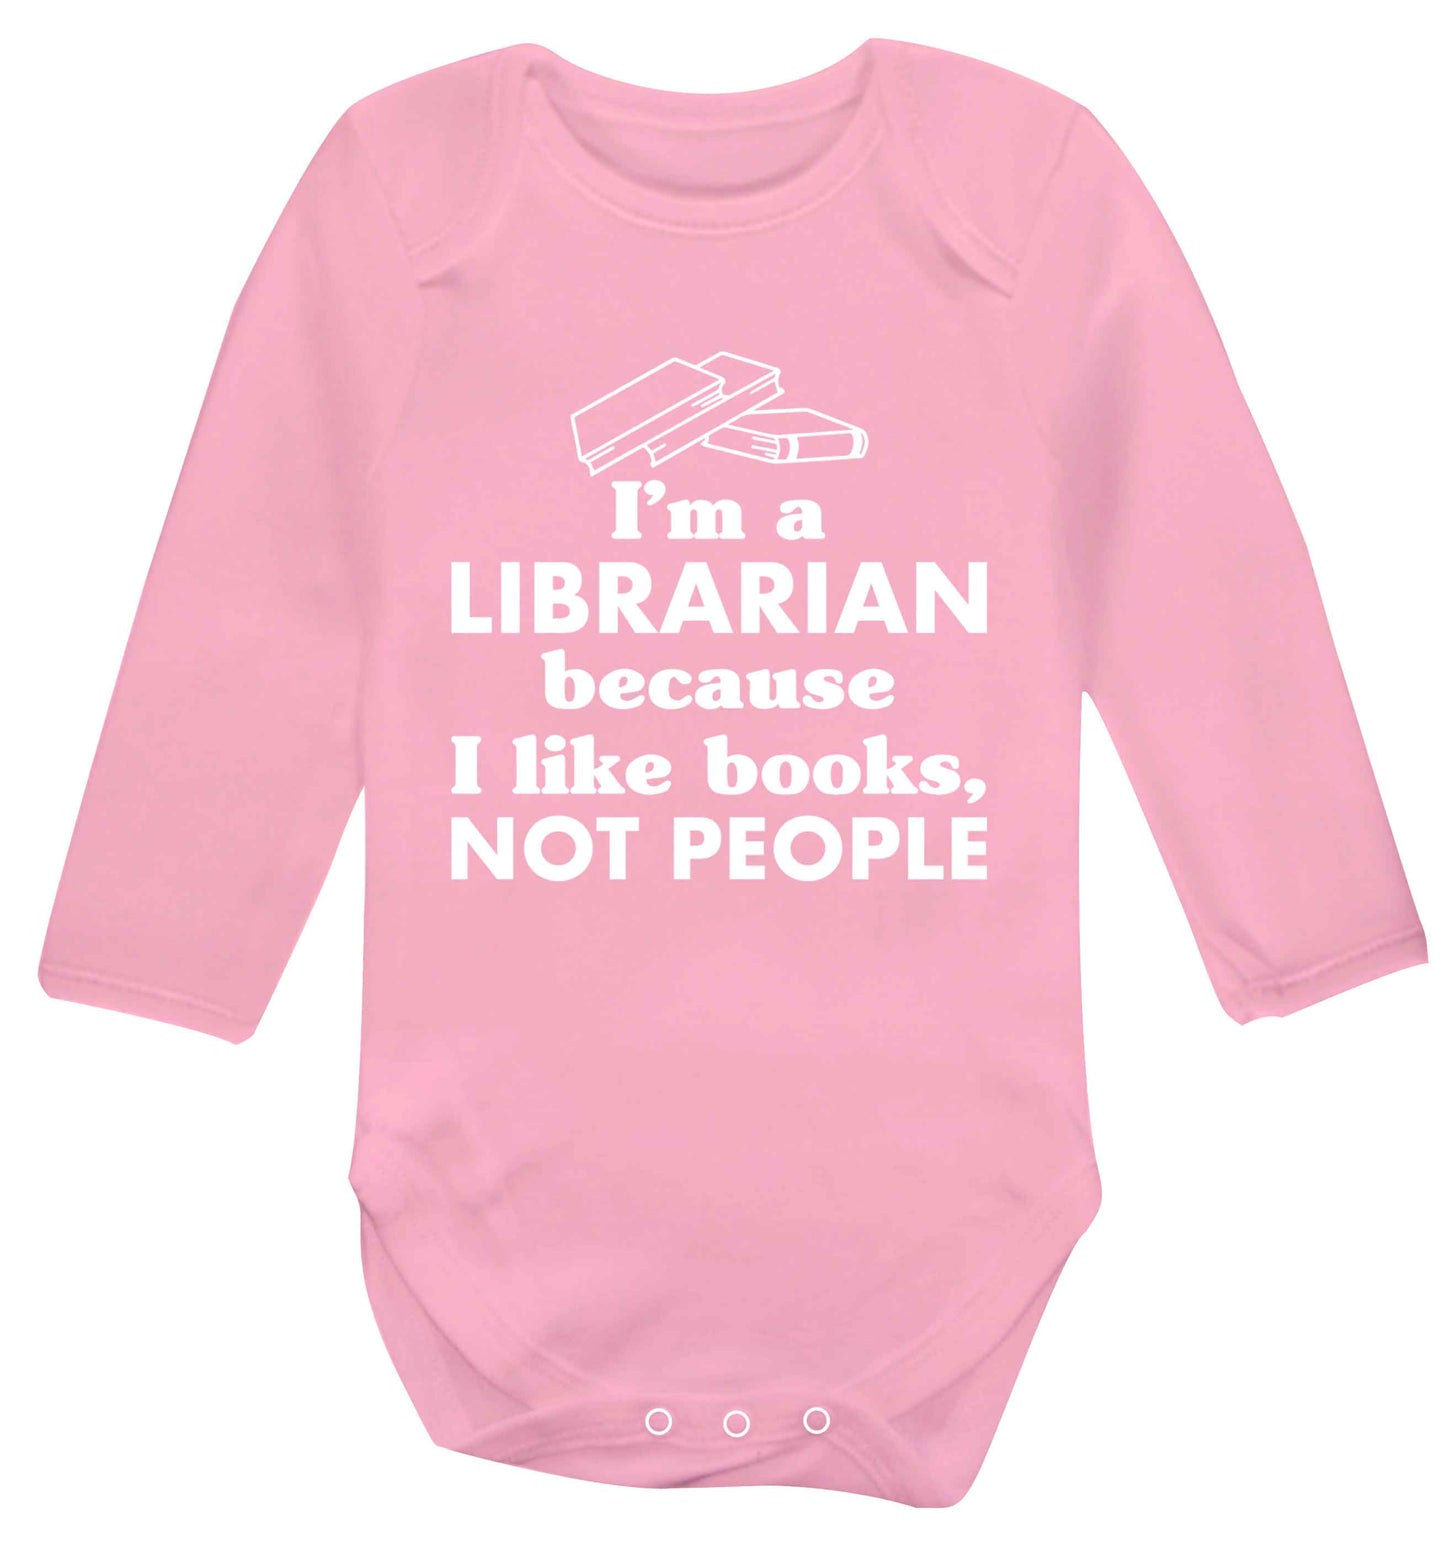 I'm a librarian because I like books not people Baby Vest long sleeved pale pink 6-12 months